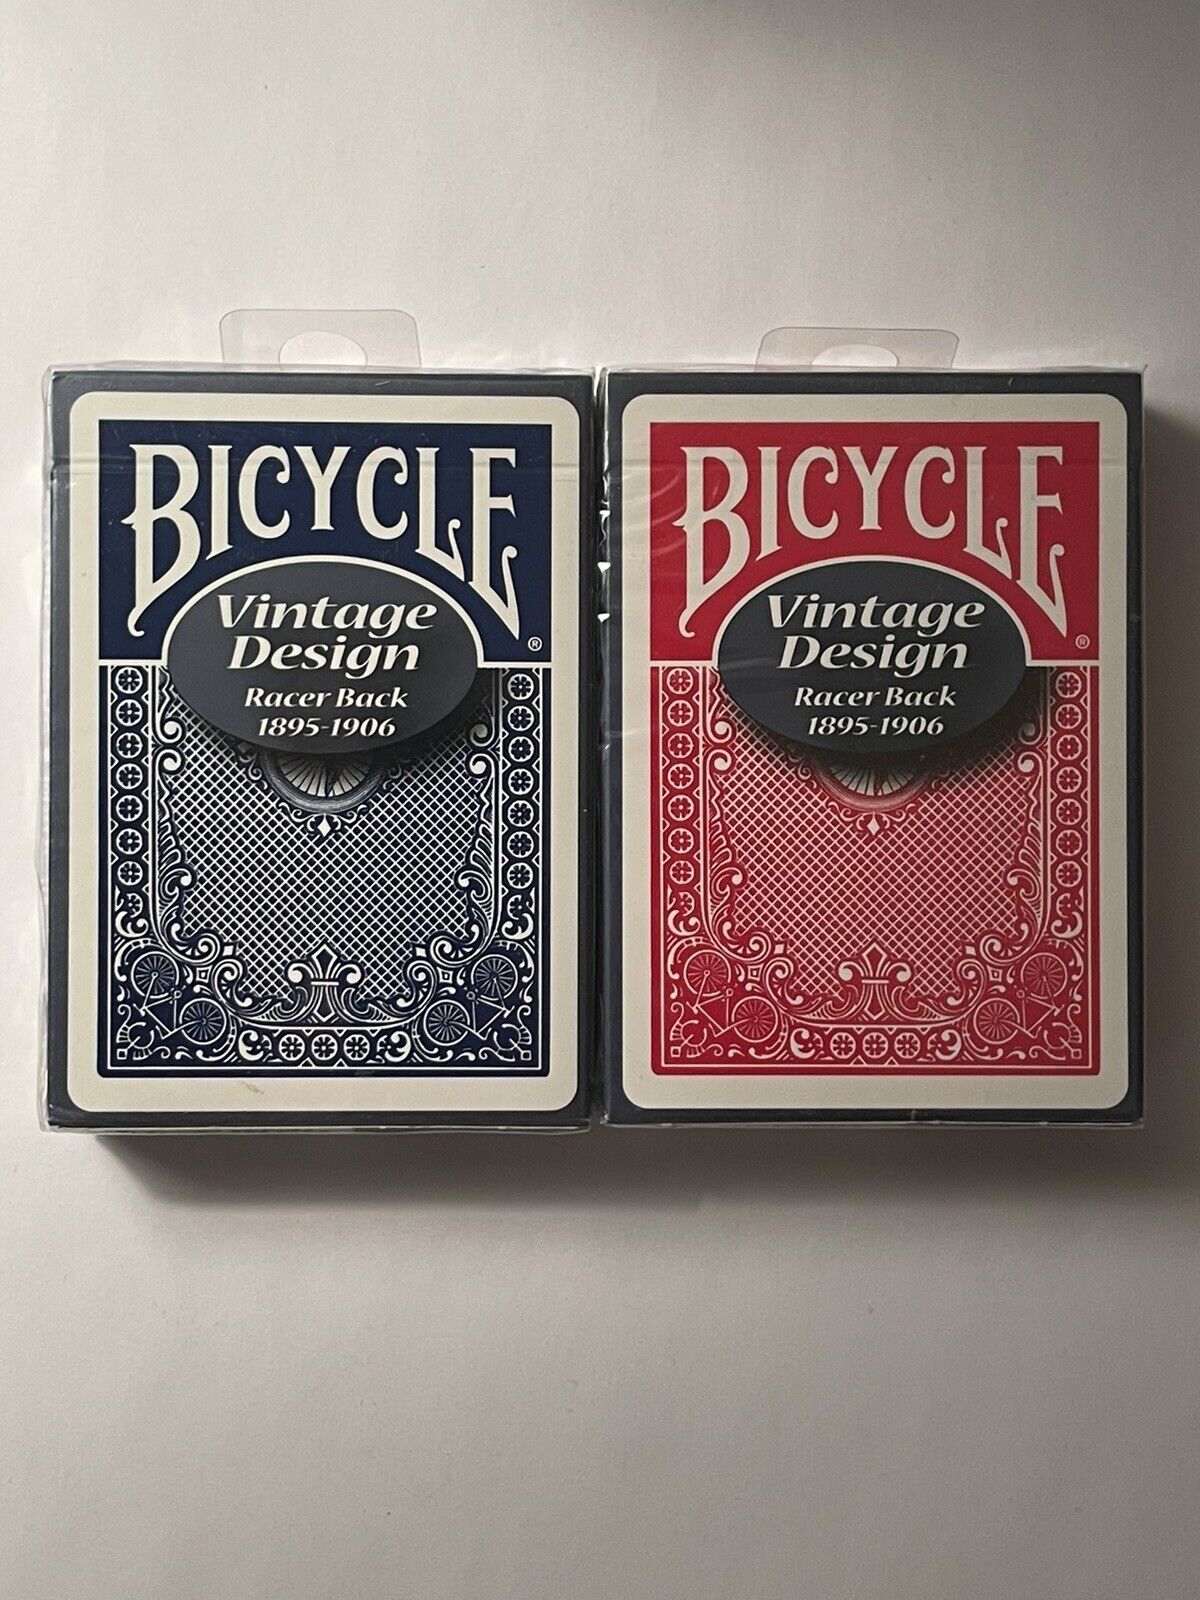 Bicycle RACER BACK Vintage Design Series Limited Edition#1. OHIO Made 1st Print